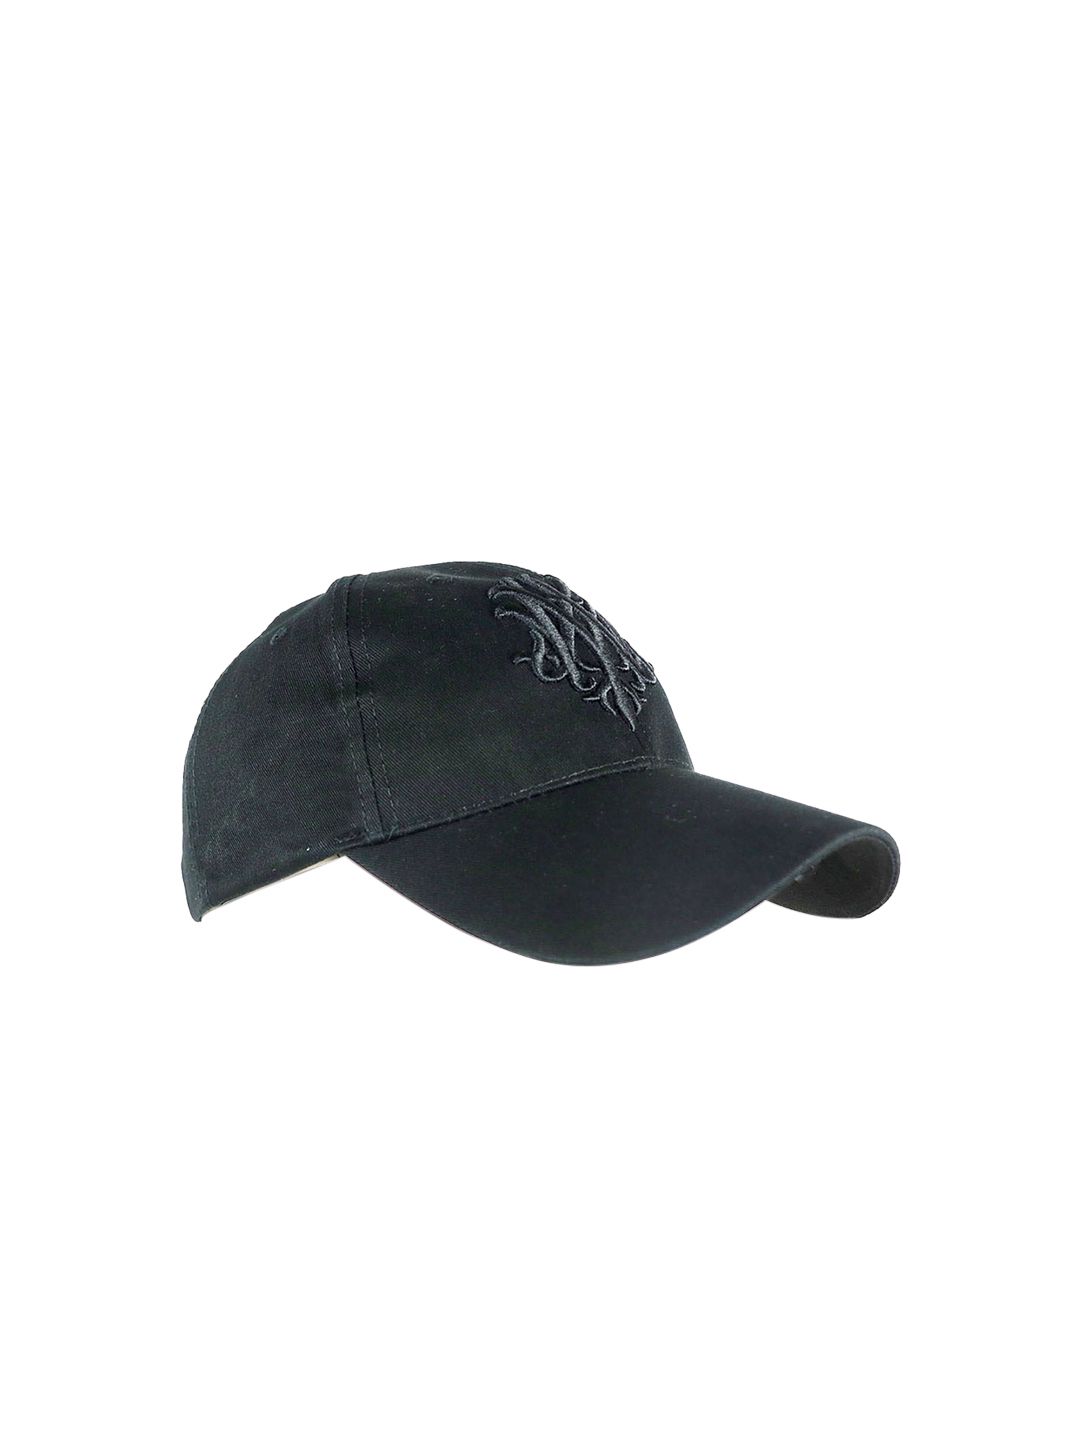 iSWEVEN Unisex Black & Grey Embroidered Snapback Cap Price in India